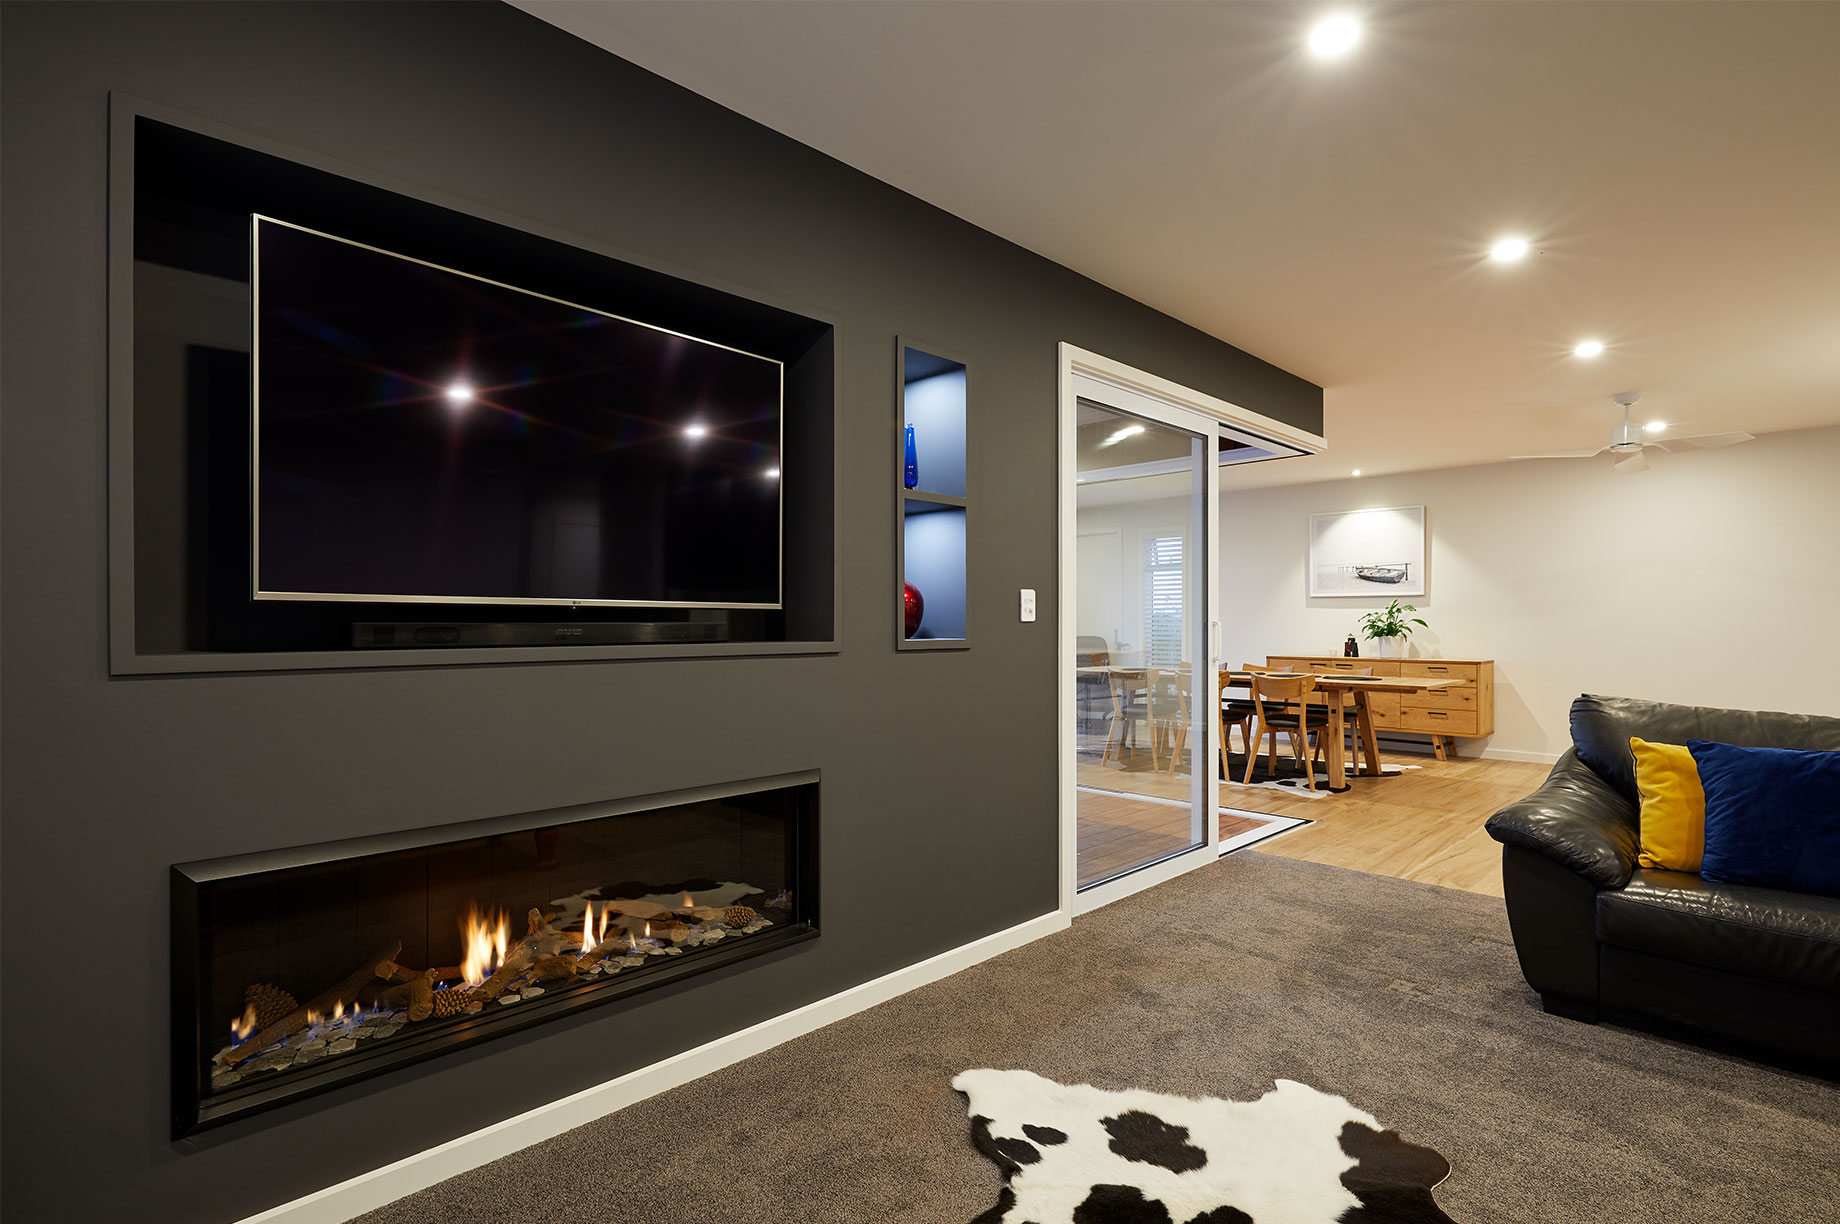 House with a large fireplace in the living room interior